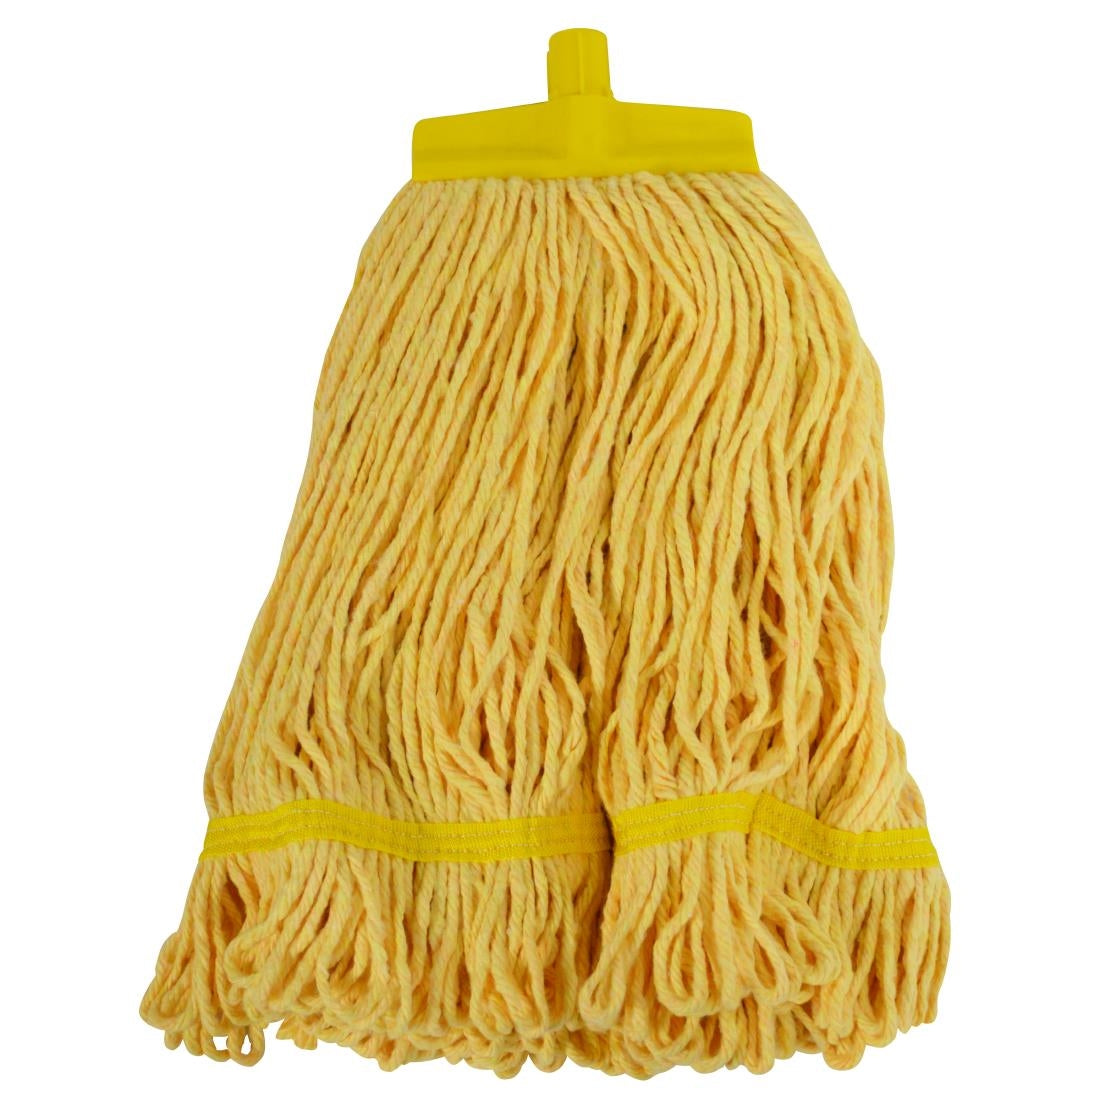 FT383 SYR Large SYRTEX Changer Socket Mop 16oz Yellow JD Catering Equipment Solutions Ltd